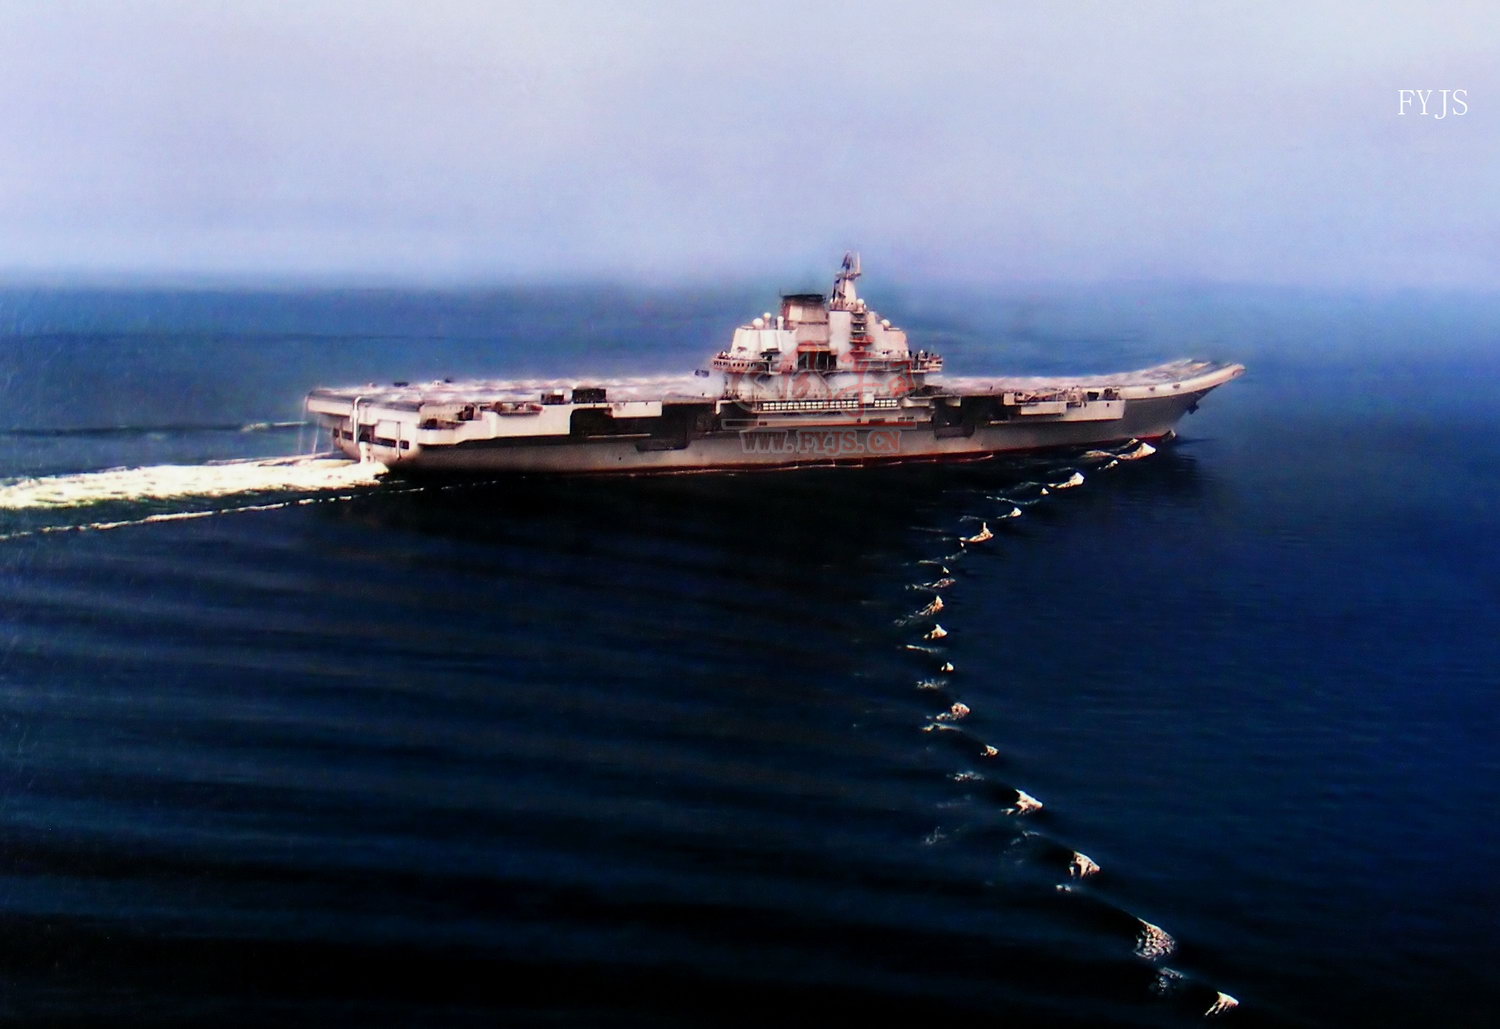 News of Second Aircraft Carrier Deleted